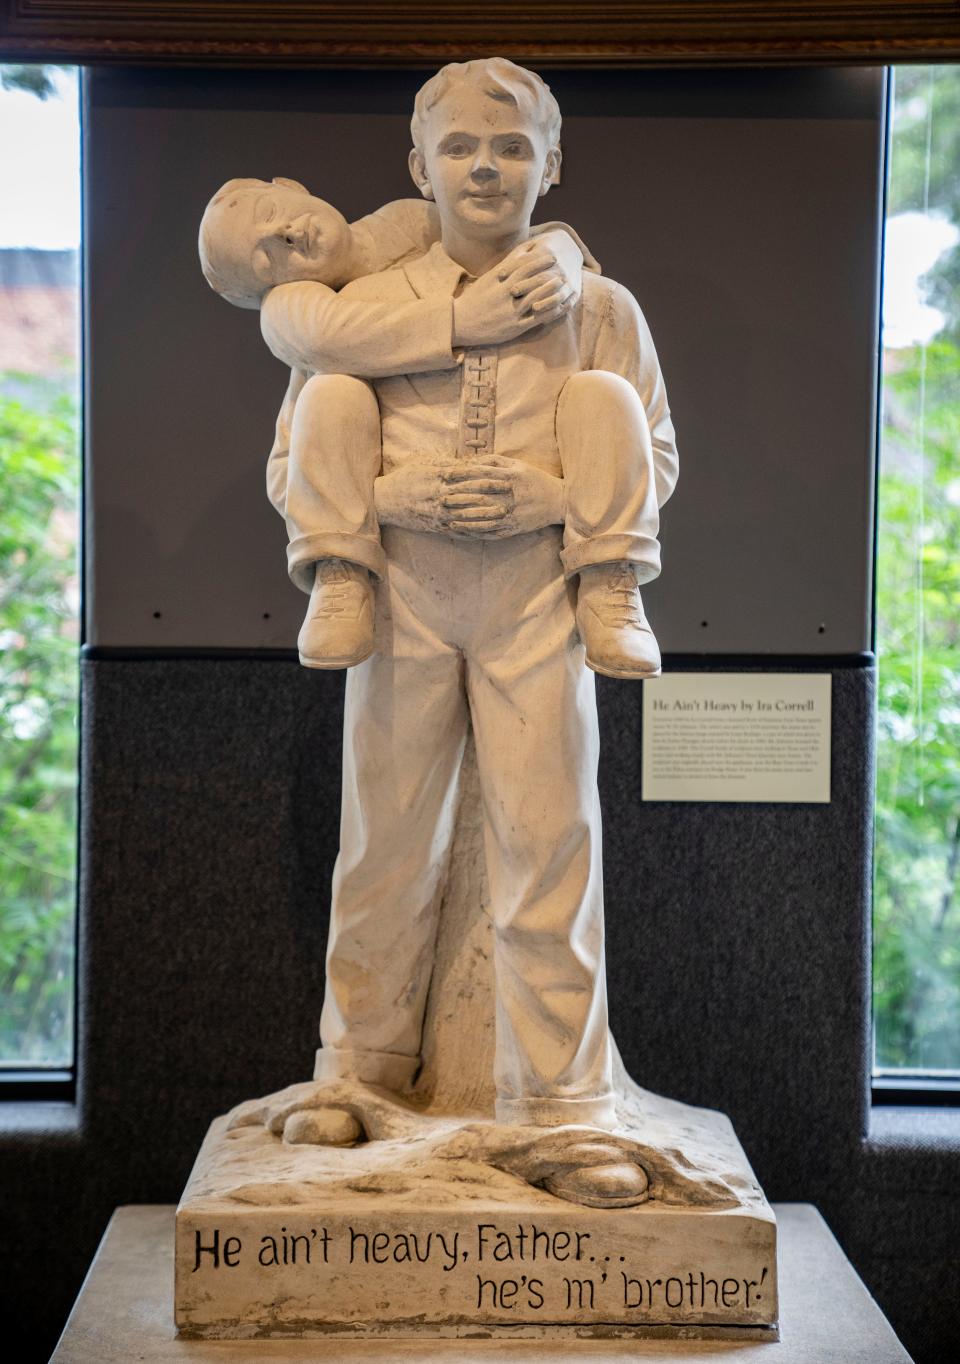 A statue engraved with "He ain't heavy, Father... he's m' brother" on display at the Boys Town Hall of History, Thursday, Aug. 3, 2023.